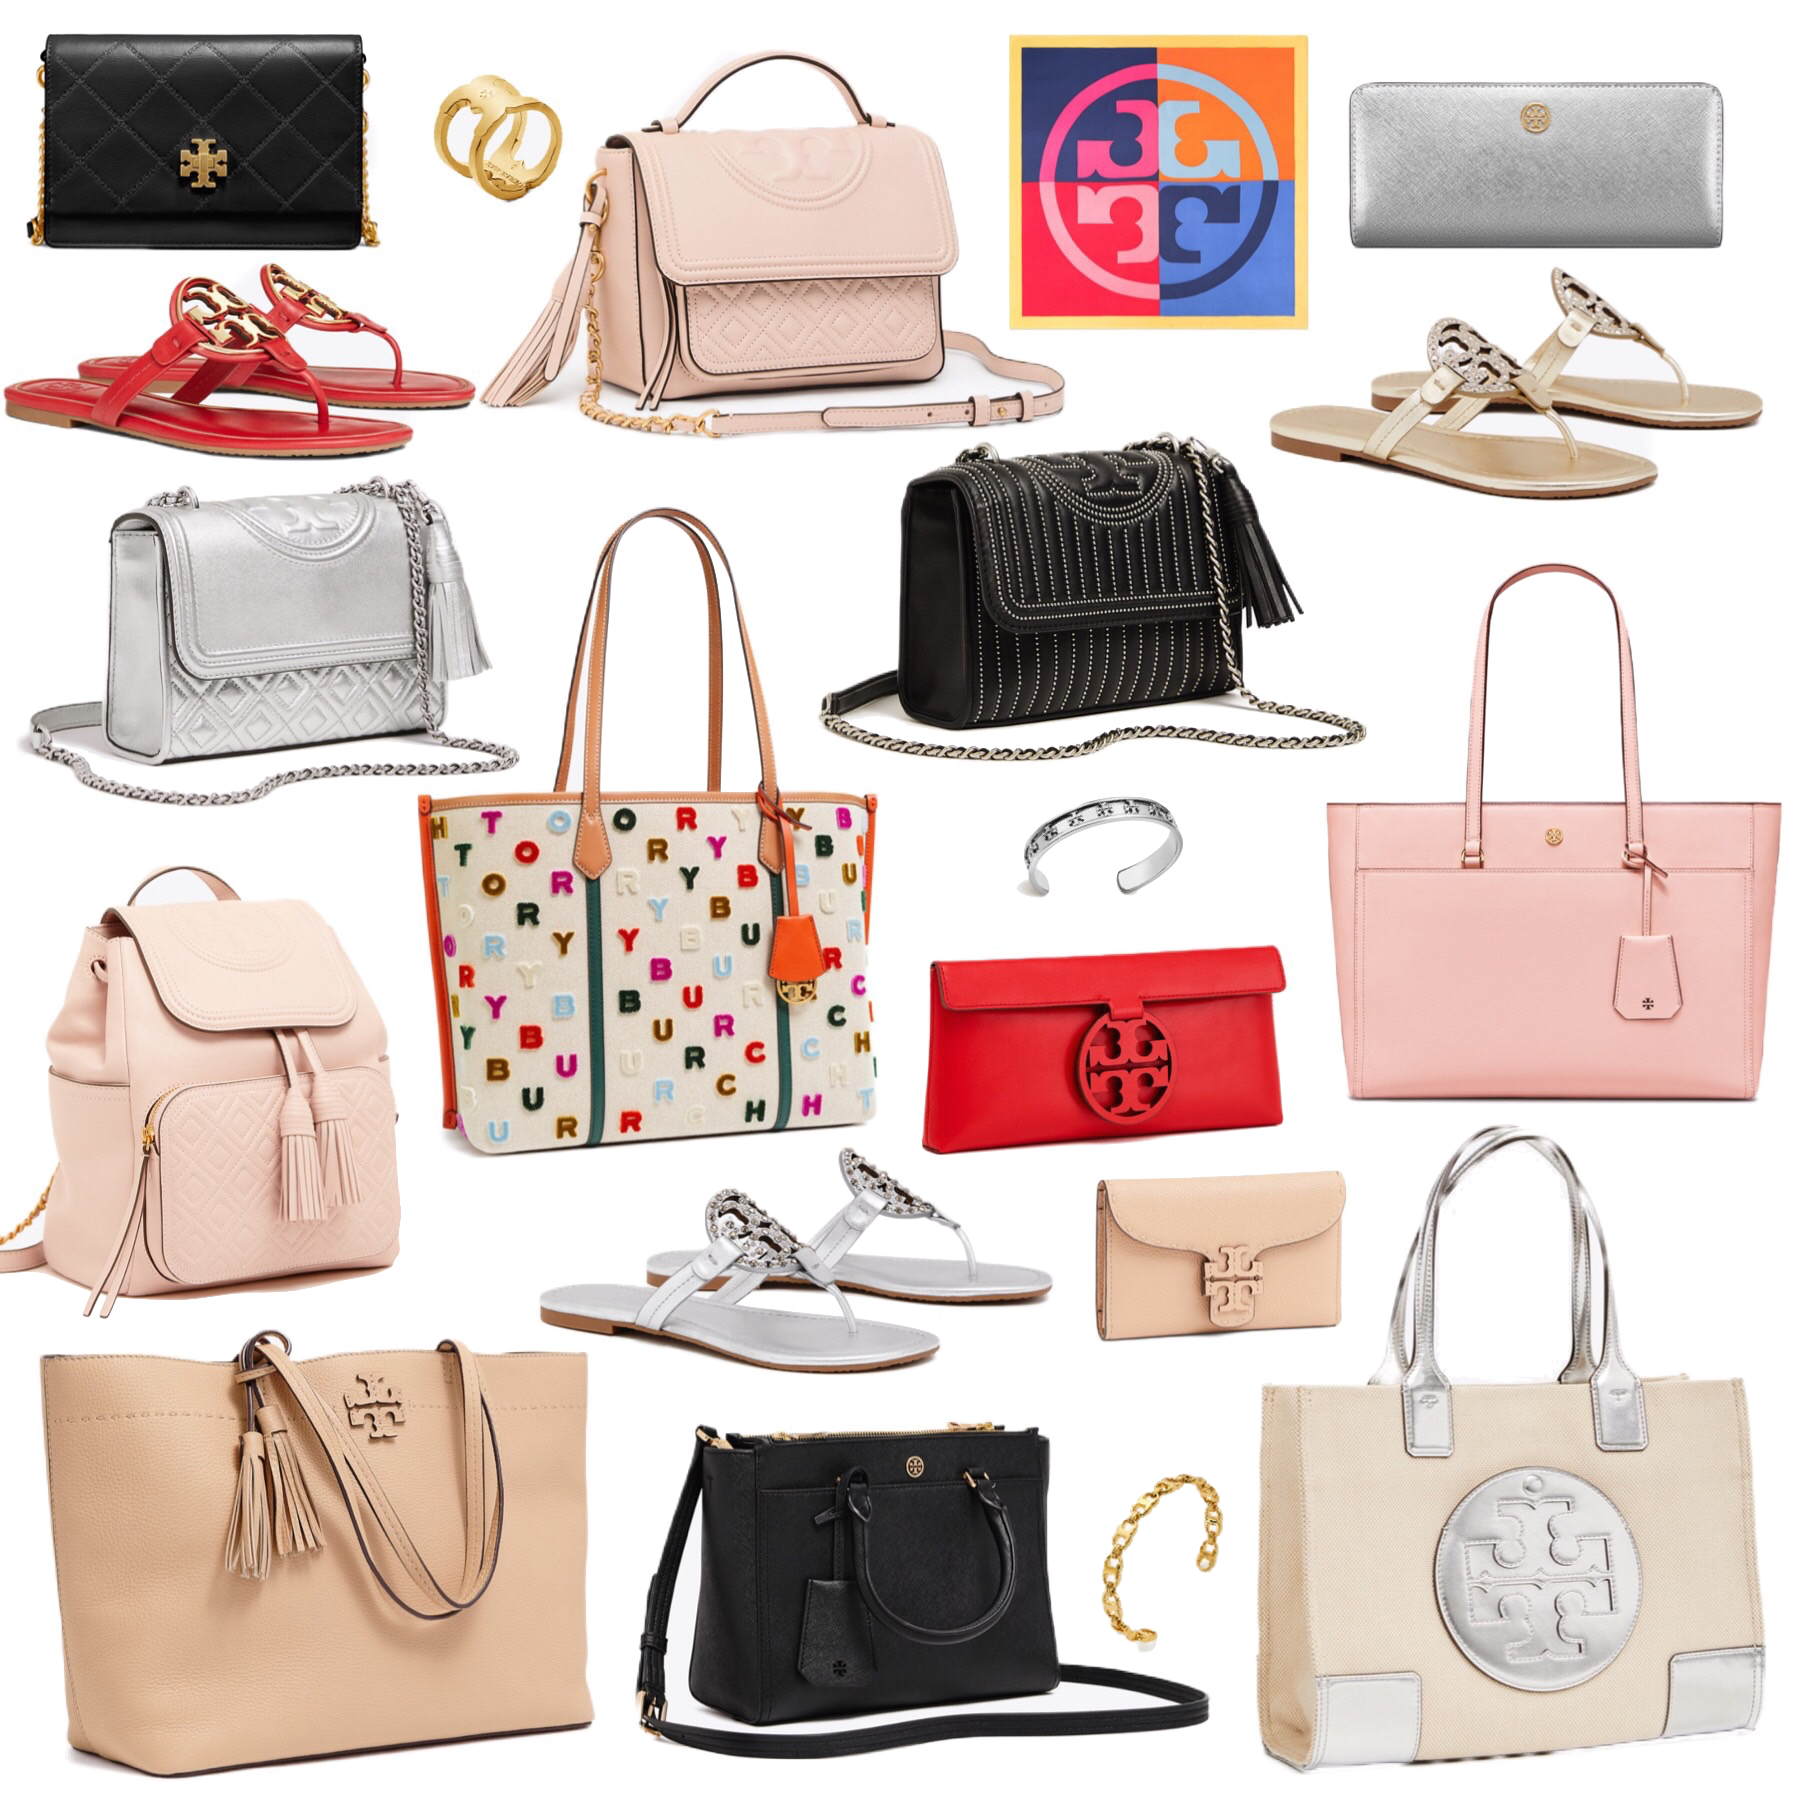 Tory Burch: Save big at the Tory Burch Private Sale